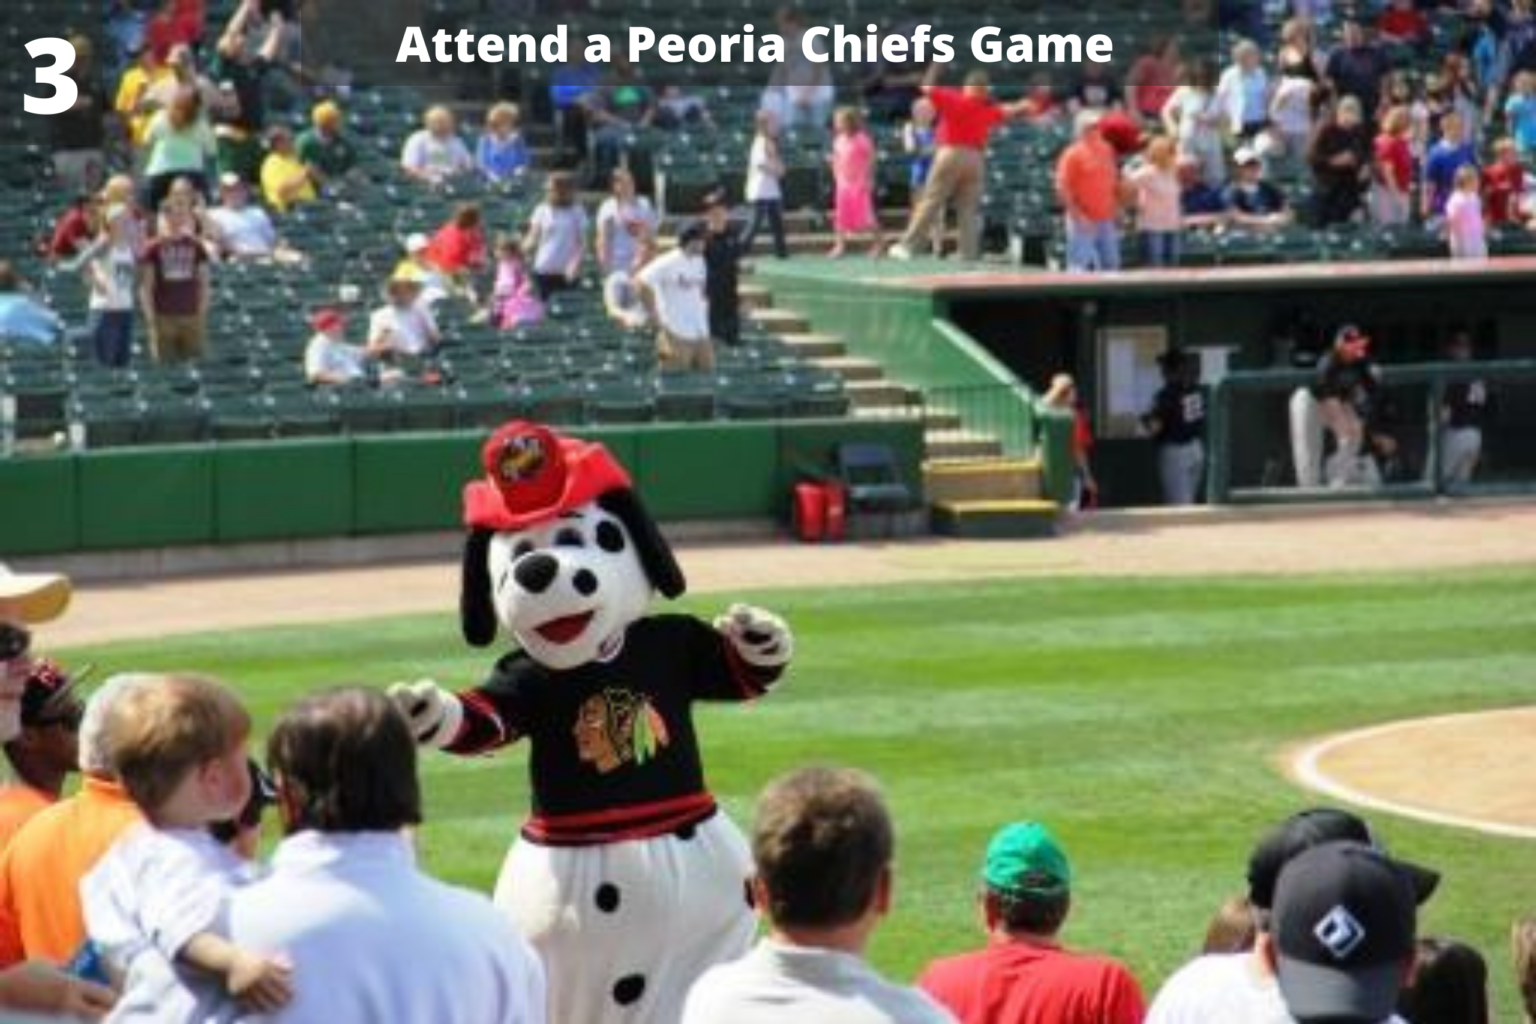 10 Ways to Play in Peoria